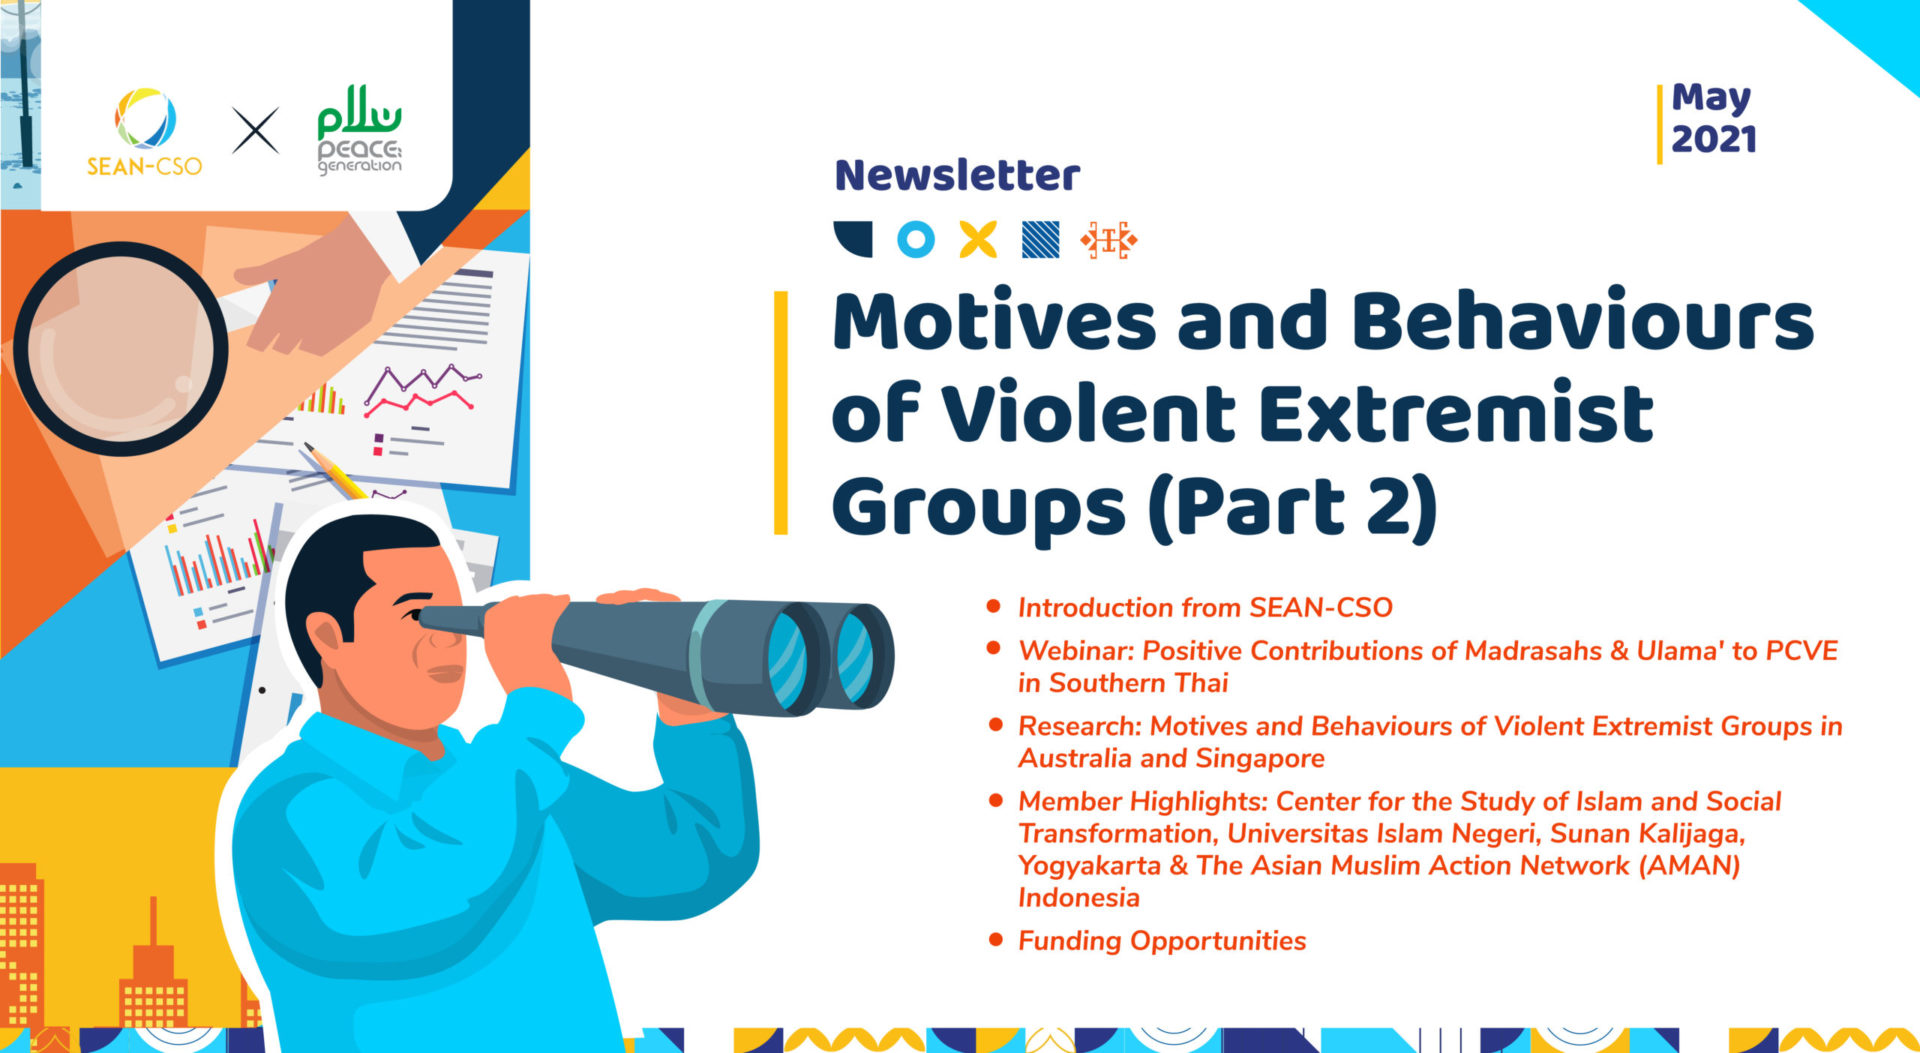 [Newsletter] May 2021: